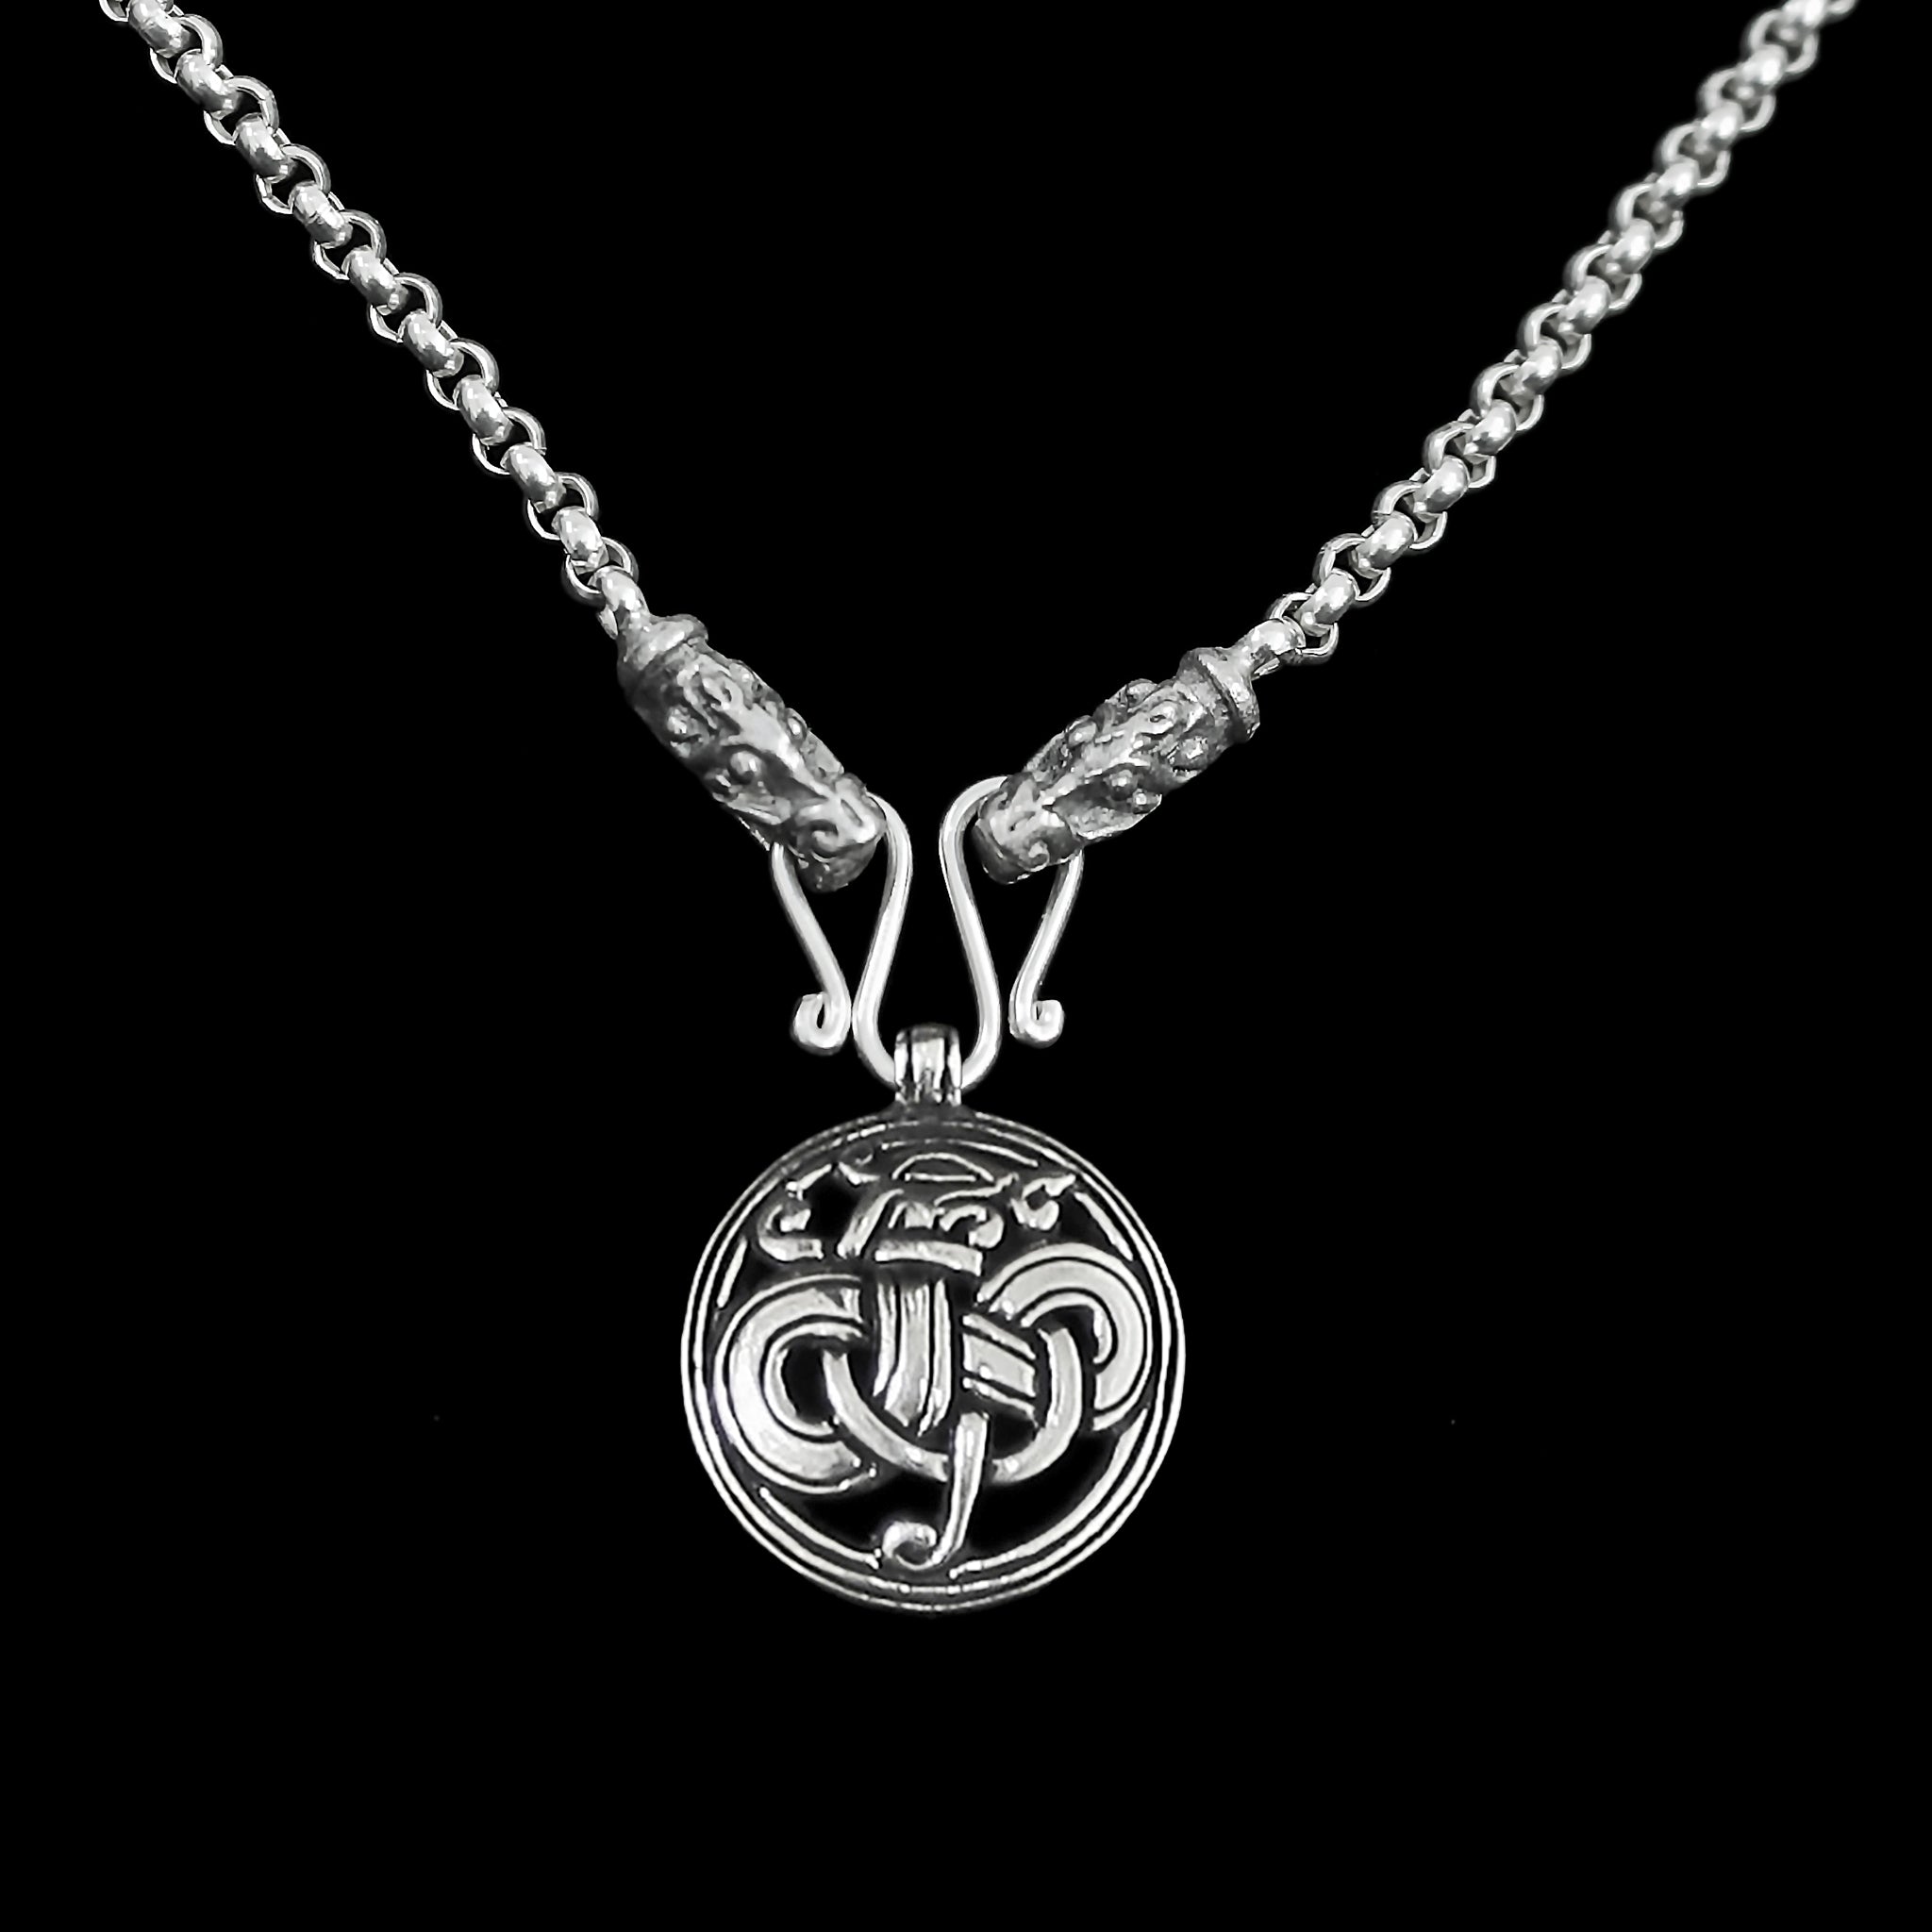 Slim Silver Anchor Chain Pendant Necklace with Gotland Dragon Heads with Urnes Dragon Pendant